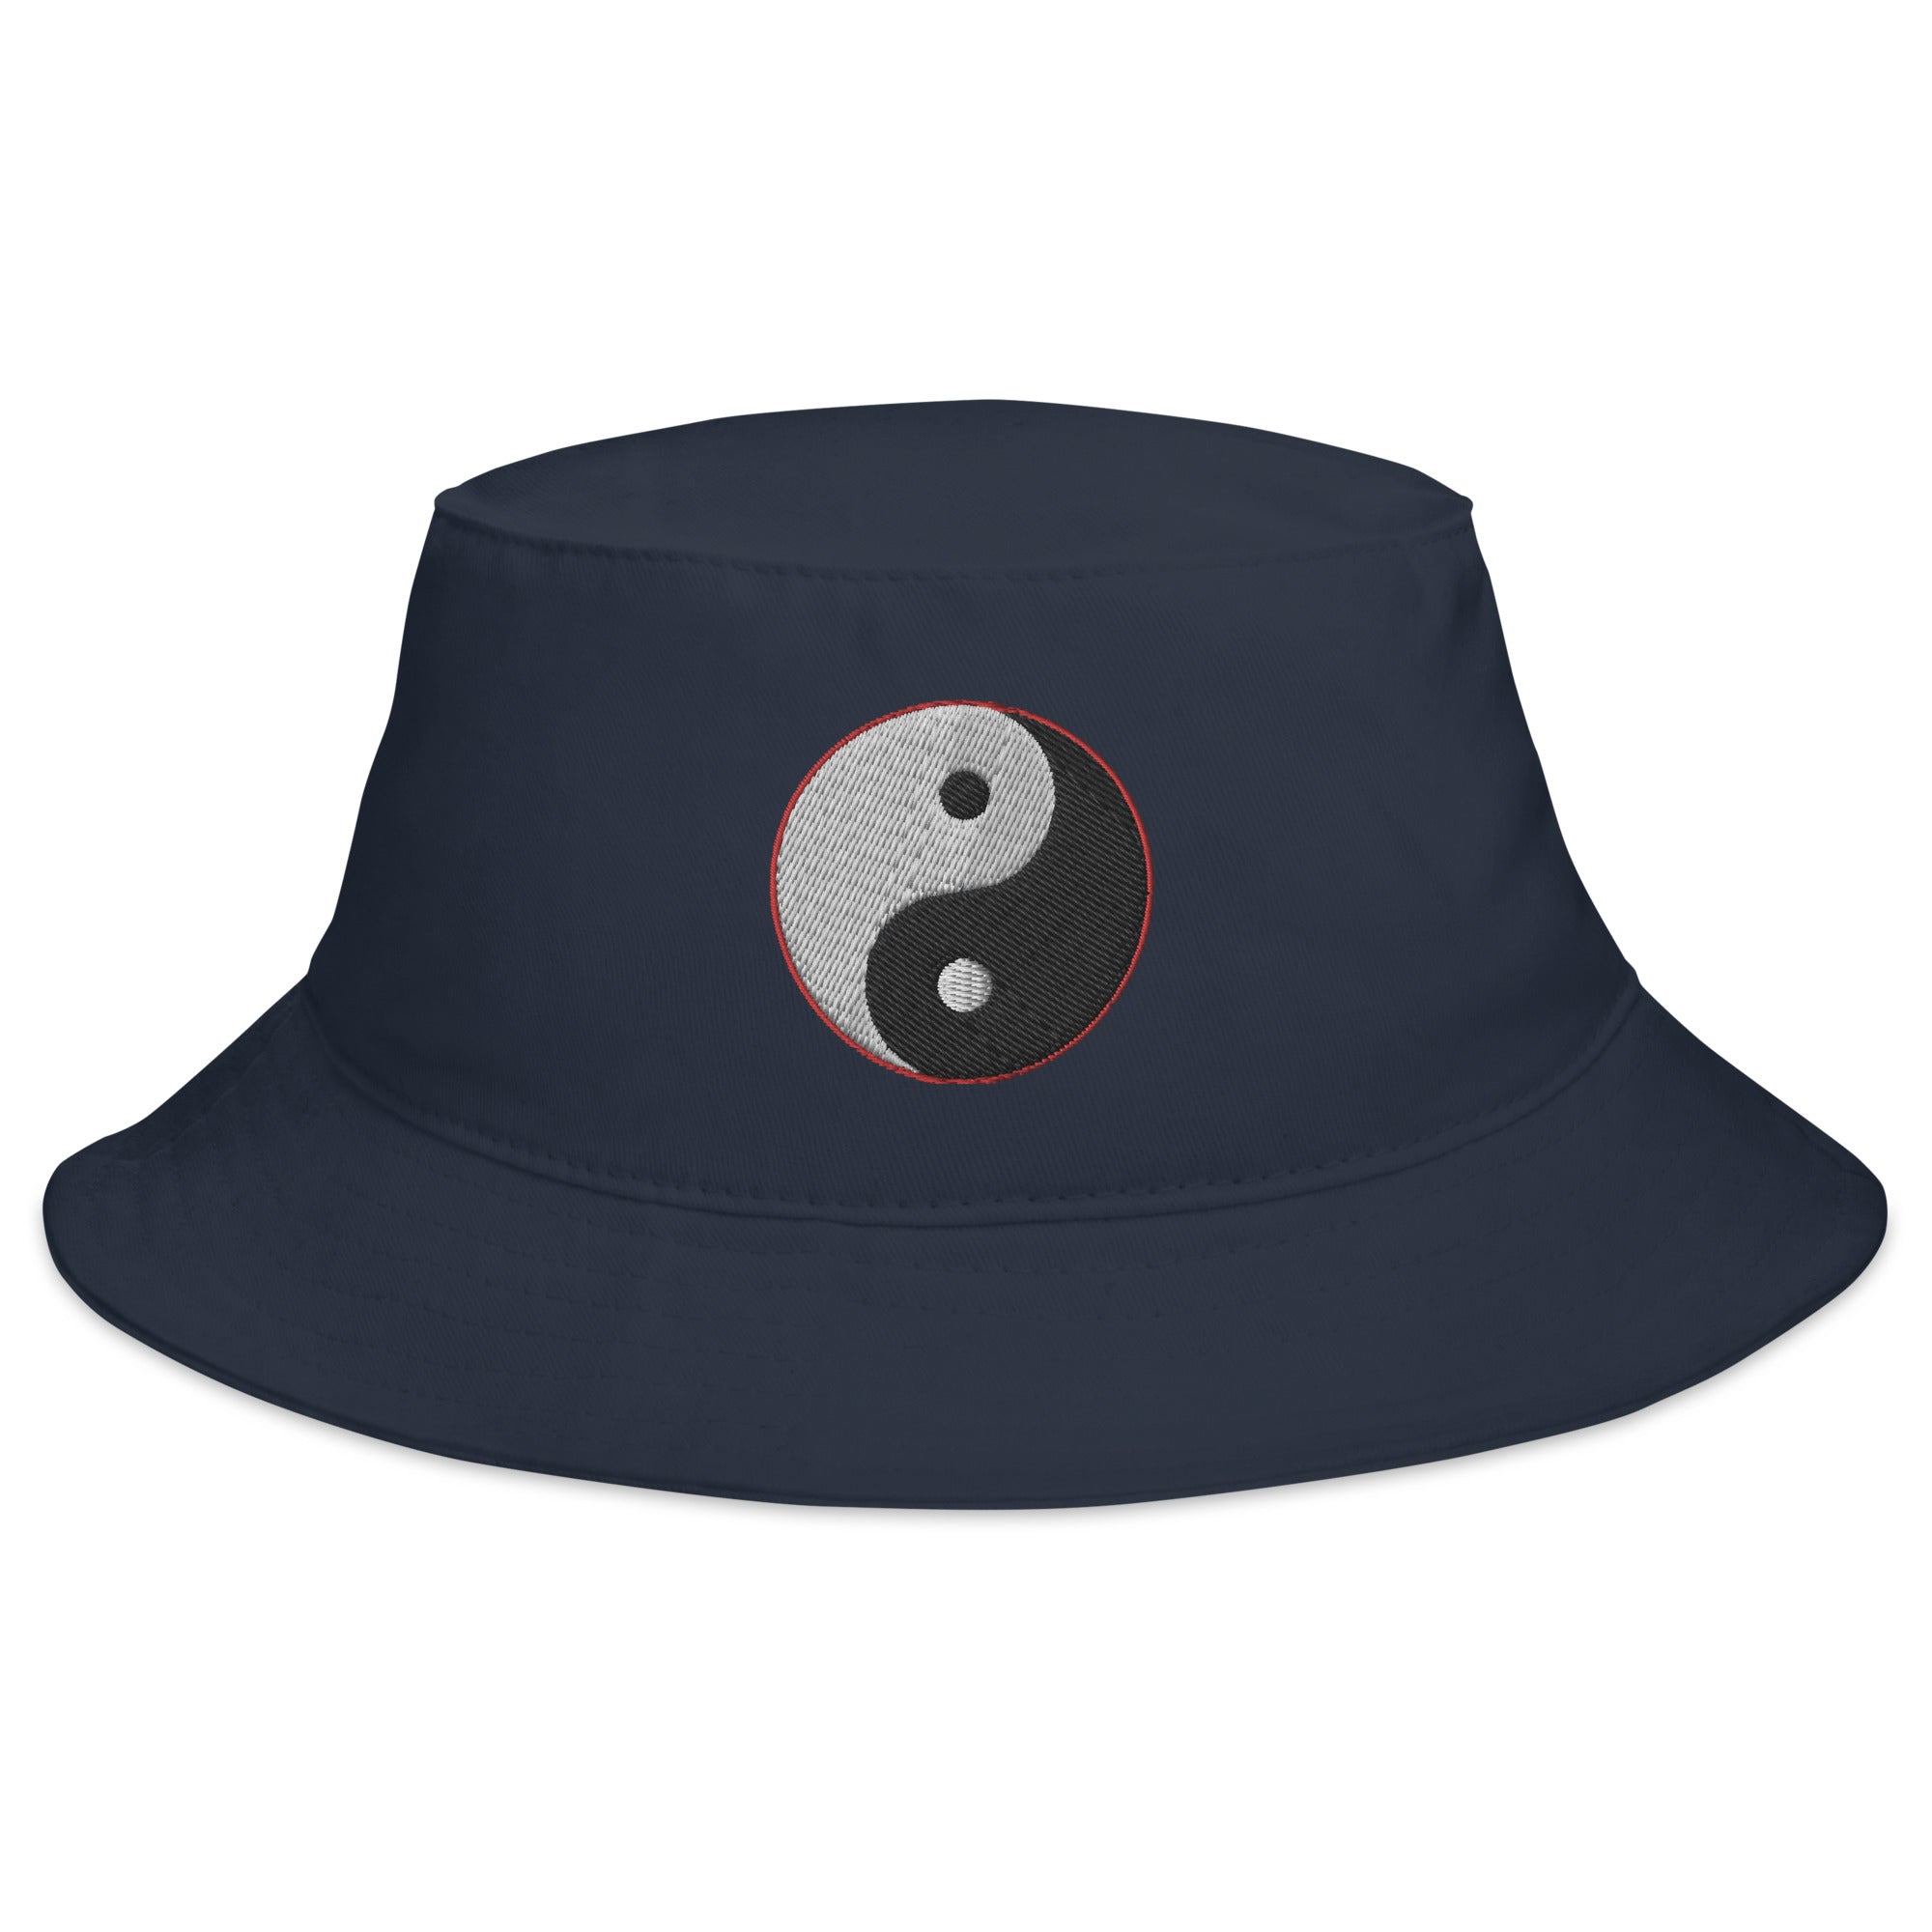 Yin and Yang Chinese Symbol Embroidered Bucket Hat